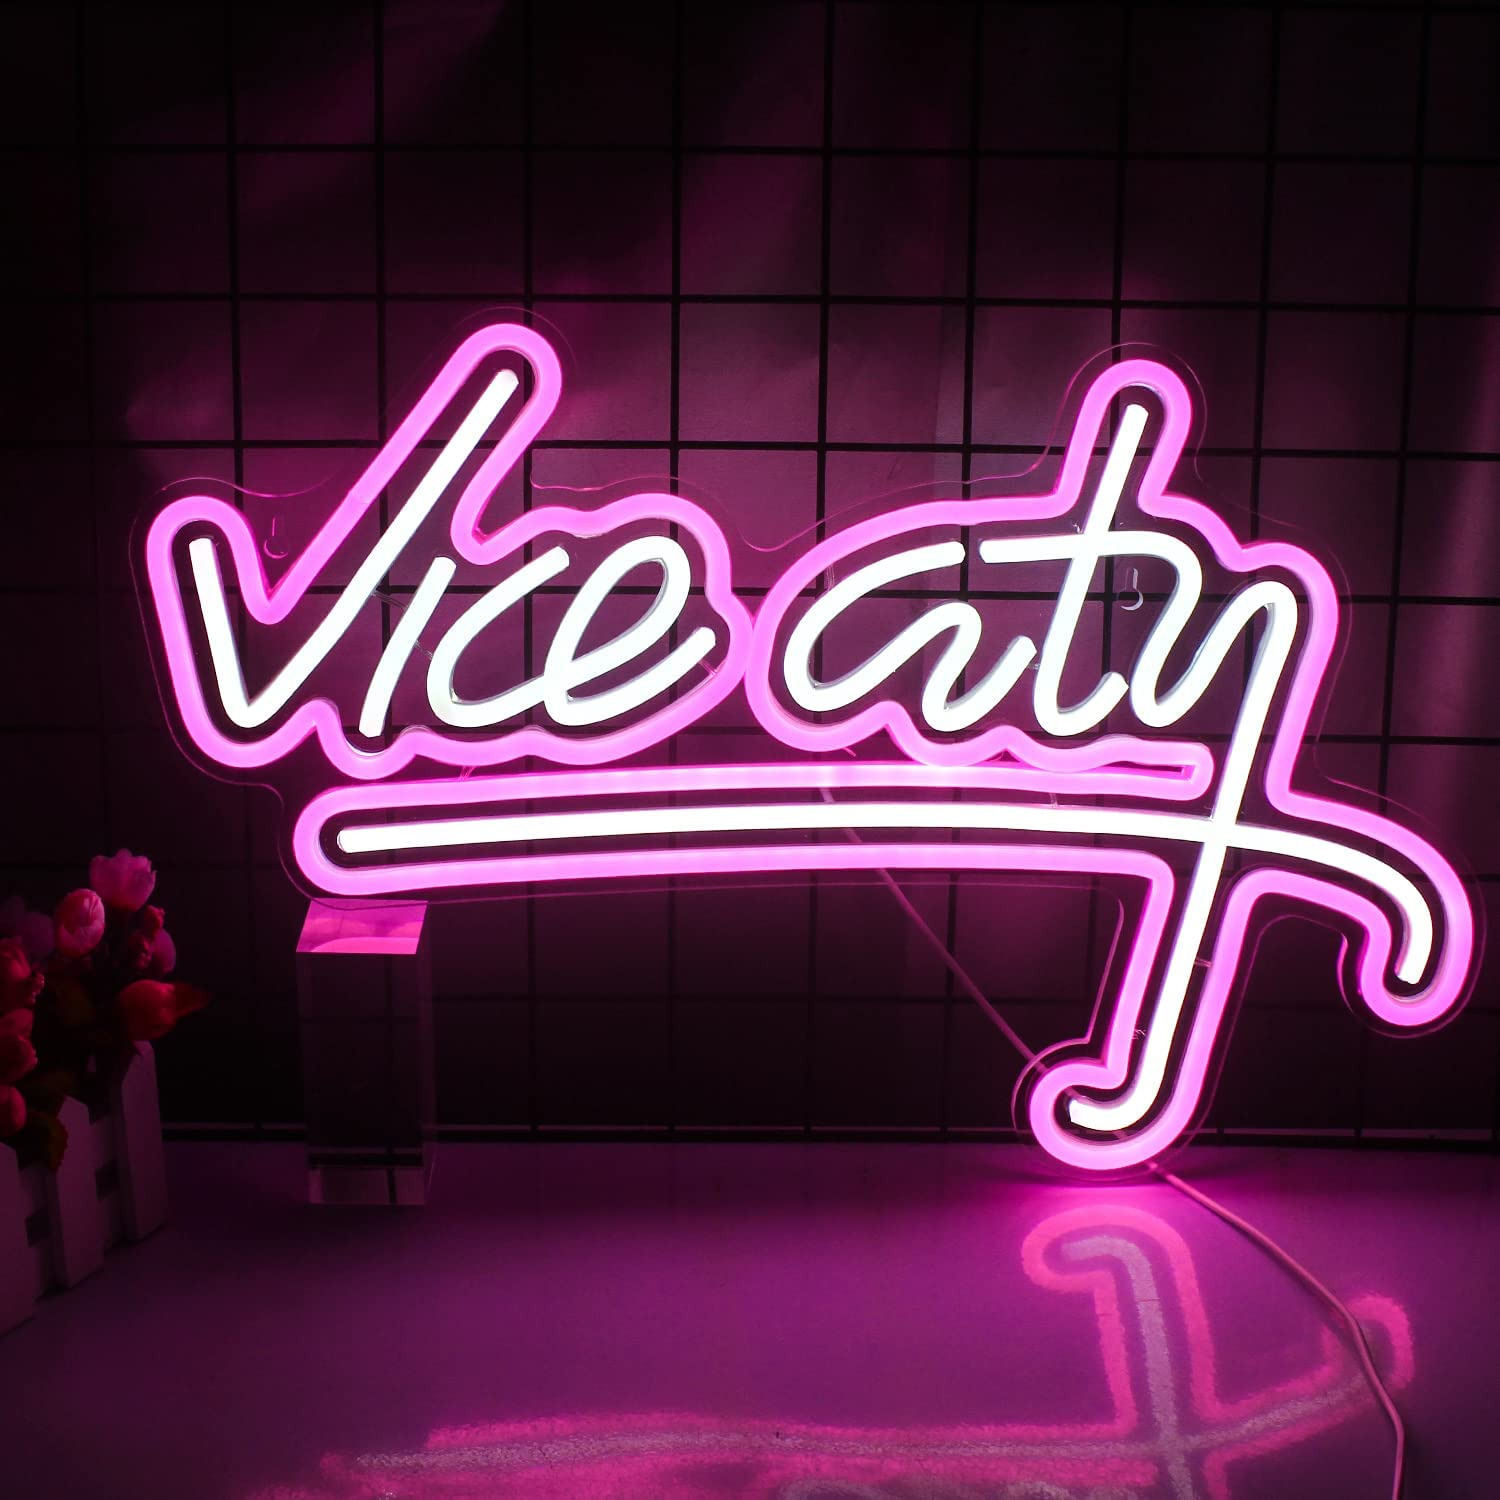 Vice City Neon Sign Pink Led Sign for Bedroom Wall Decor USB Powered Letter Neon